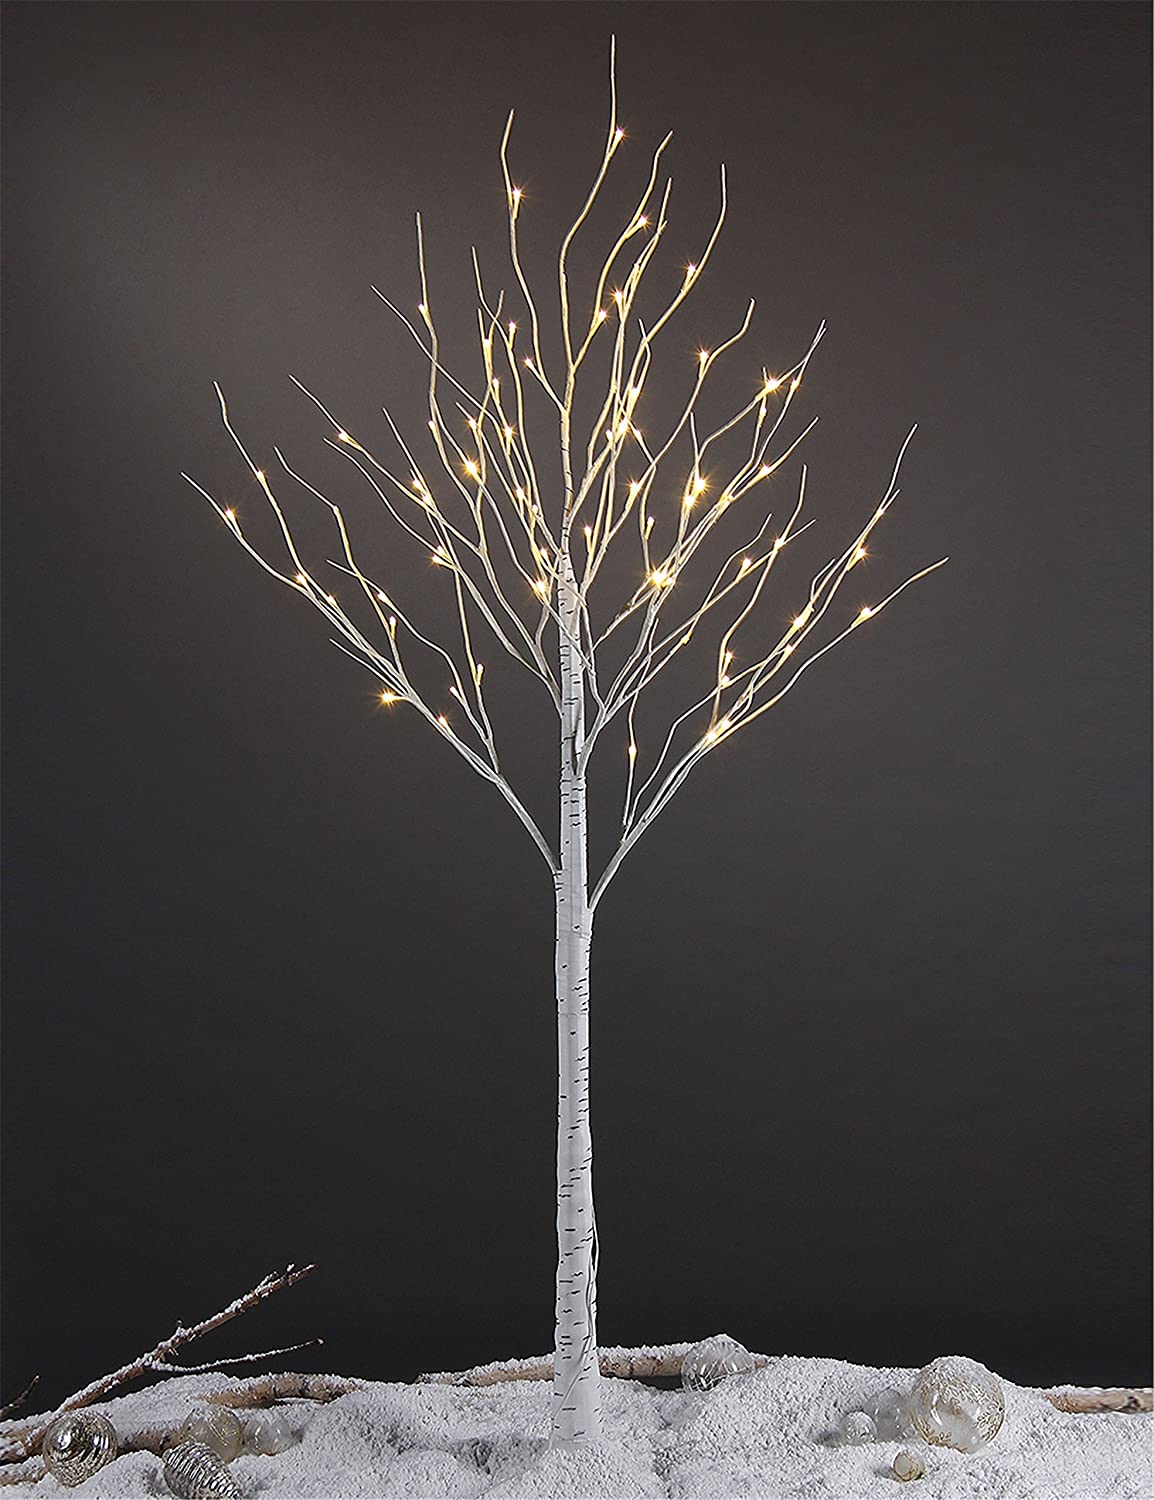 6ft Lighted Birch Tree 72 LED Artificial Tree for Decoration Inside and Outside , Home Patio Wedding Festival Christmas Decor , Warm White